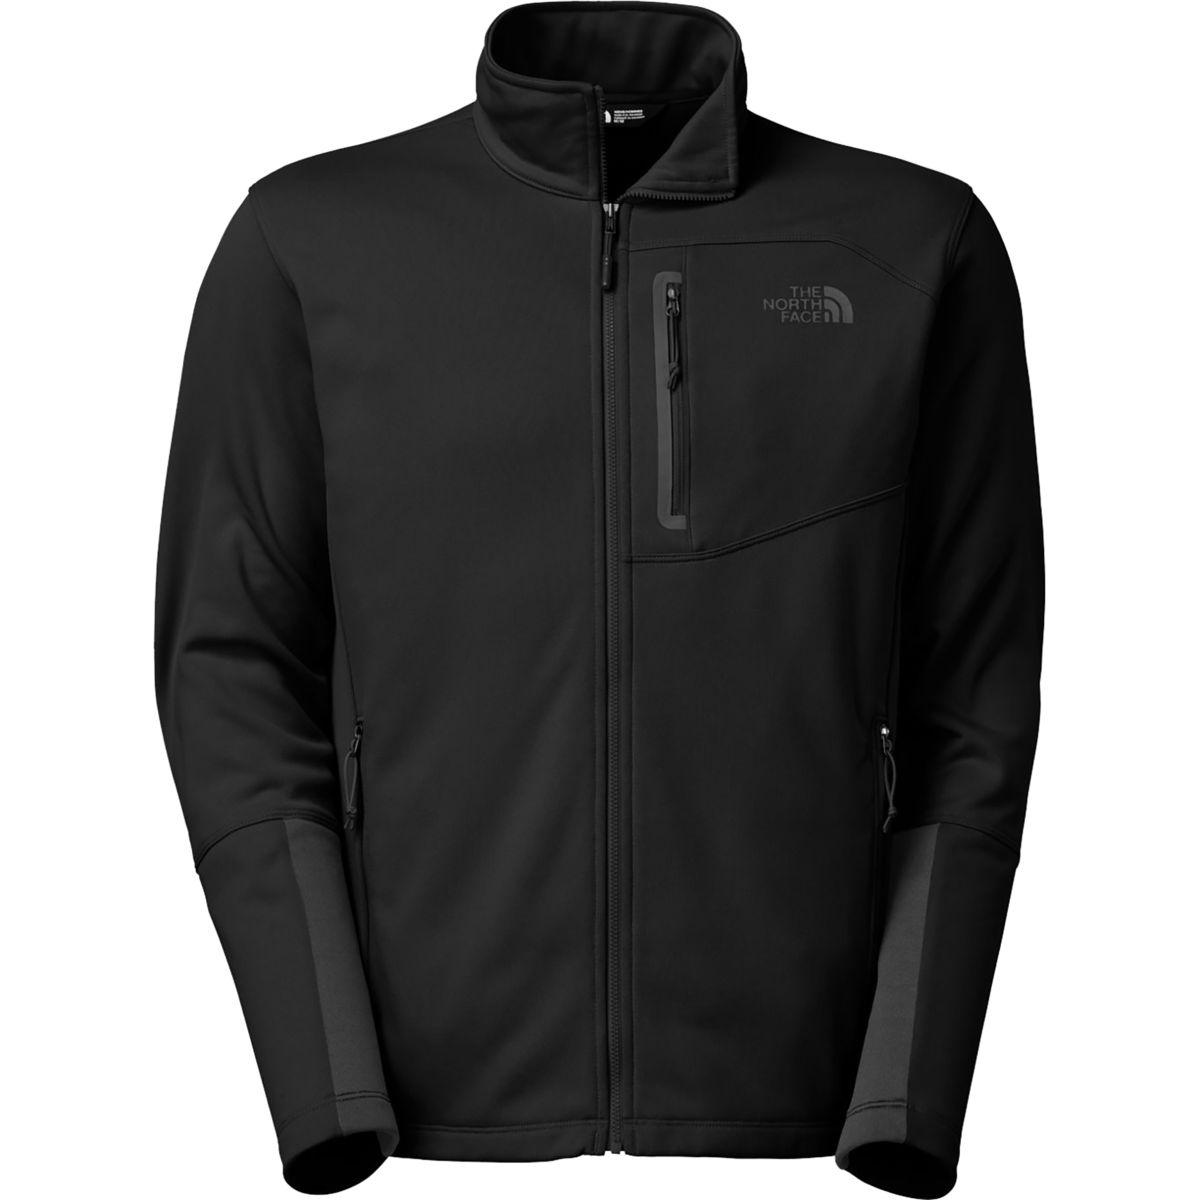 Lyst - The North Face Canyonlands Full-zip Jacket in Black for Men